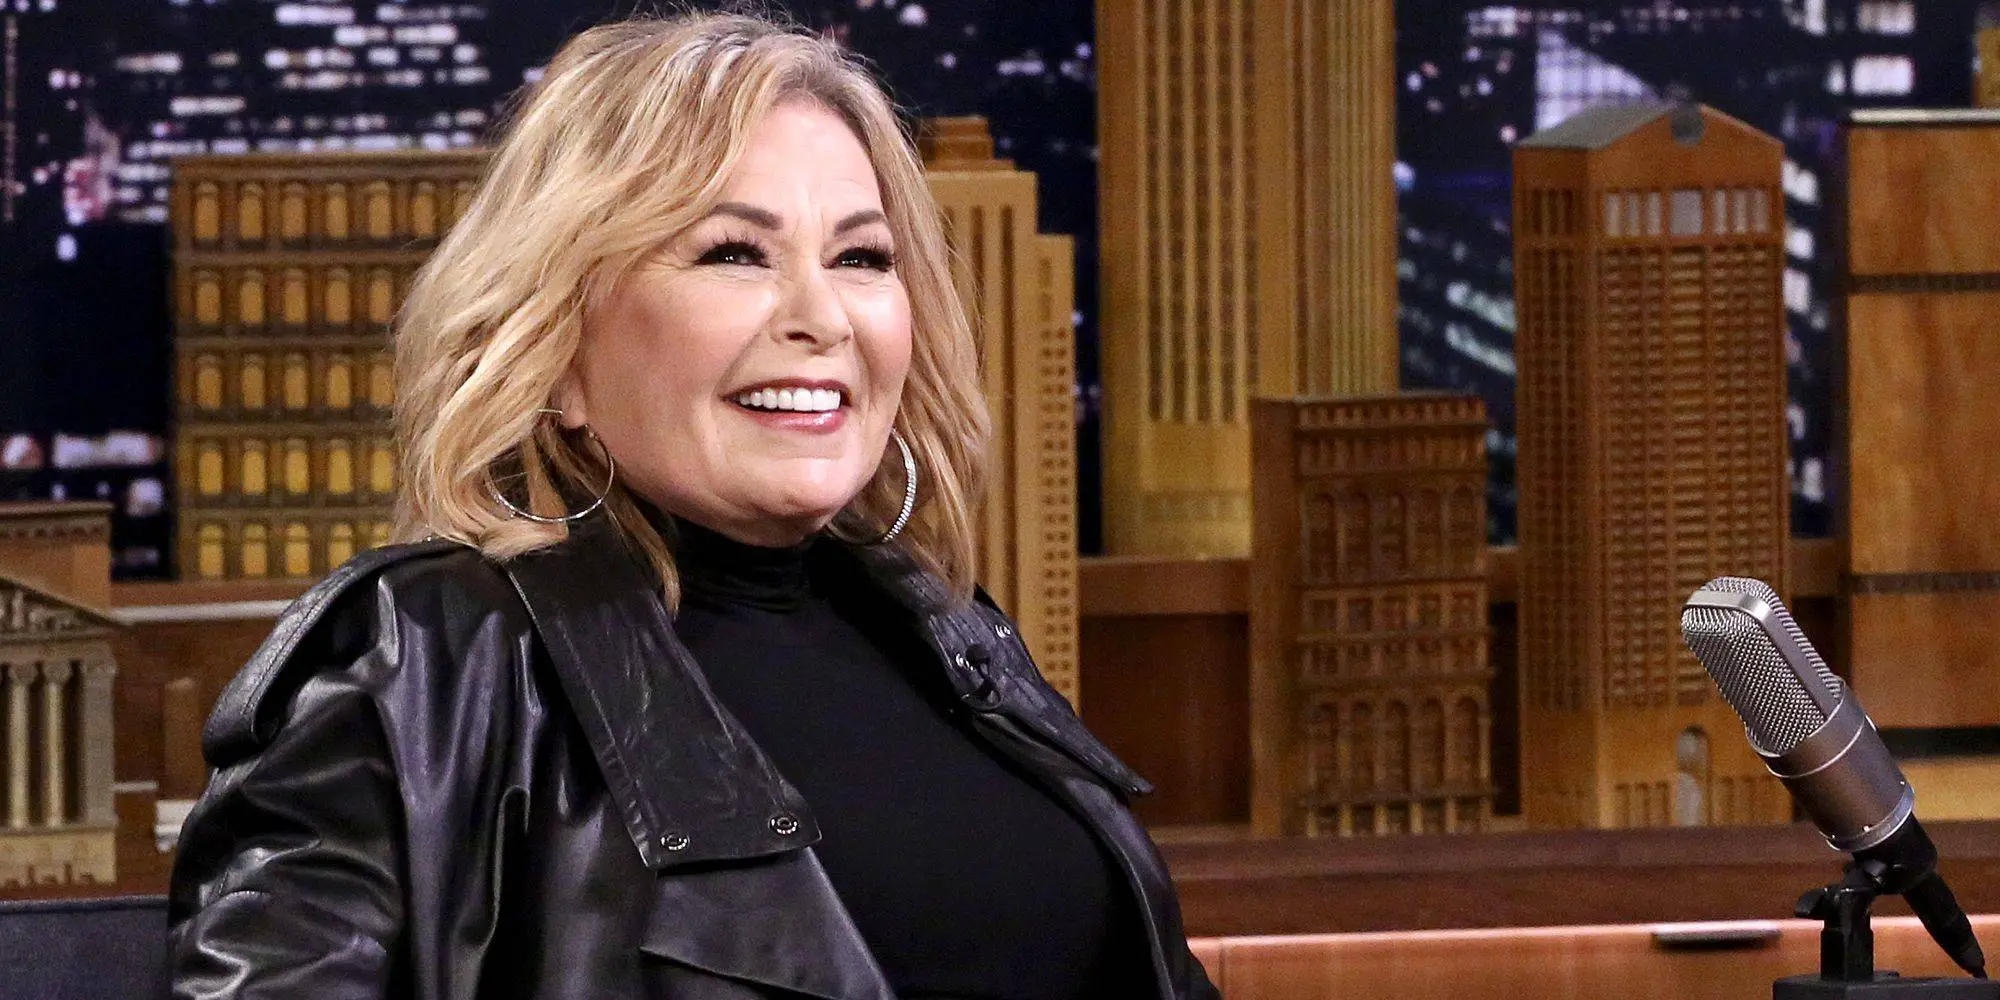 Roseanne Barr Net Worth: Interesting Facts You didn’t know about the ‘Roseanne’ Star